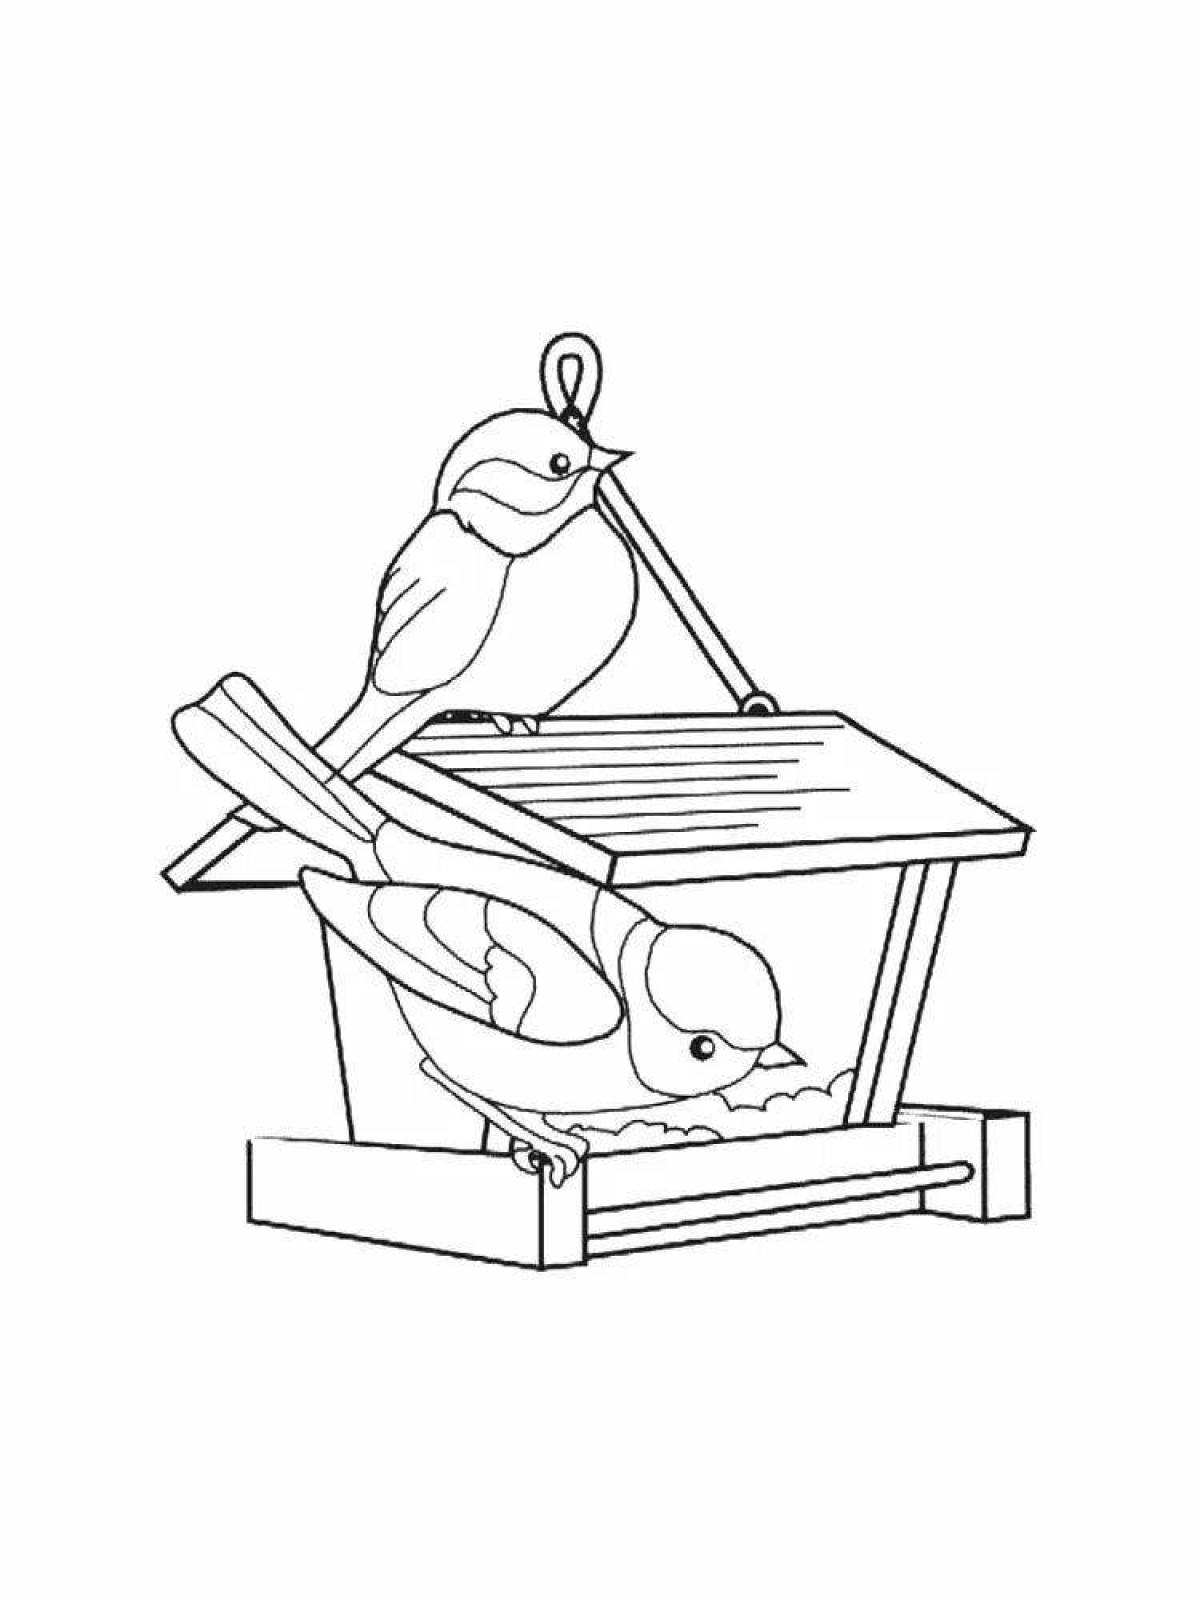 Grand coloring page birds at the feeder in winter